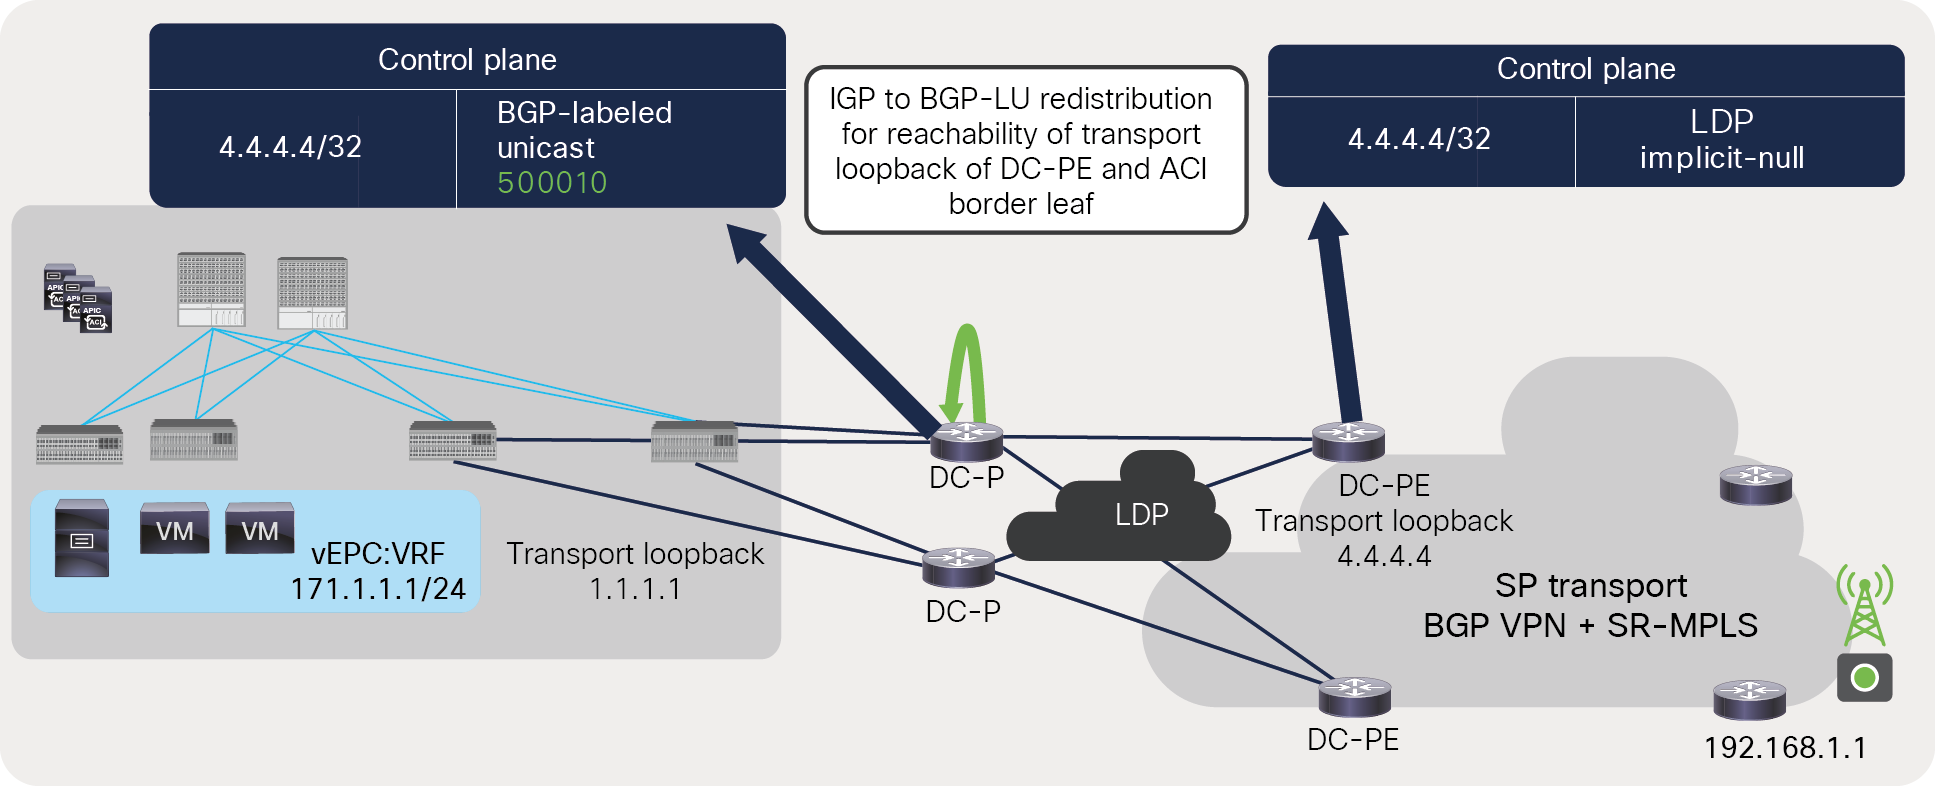 Label advertisement for DC-PE’s transport loopback across MPLS LDP network